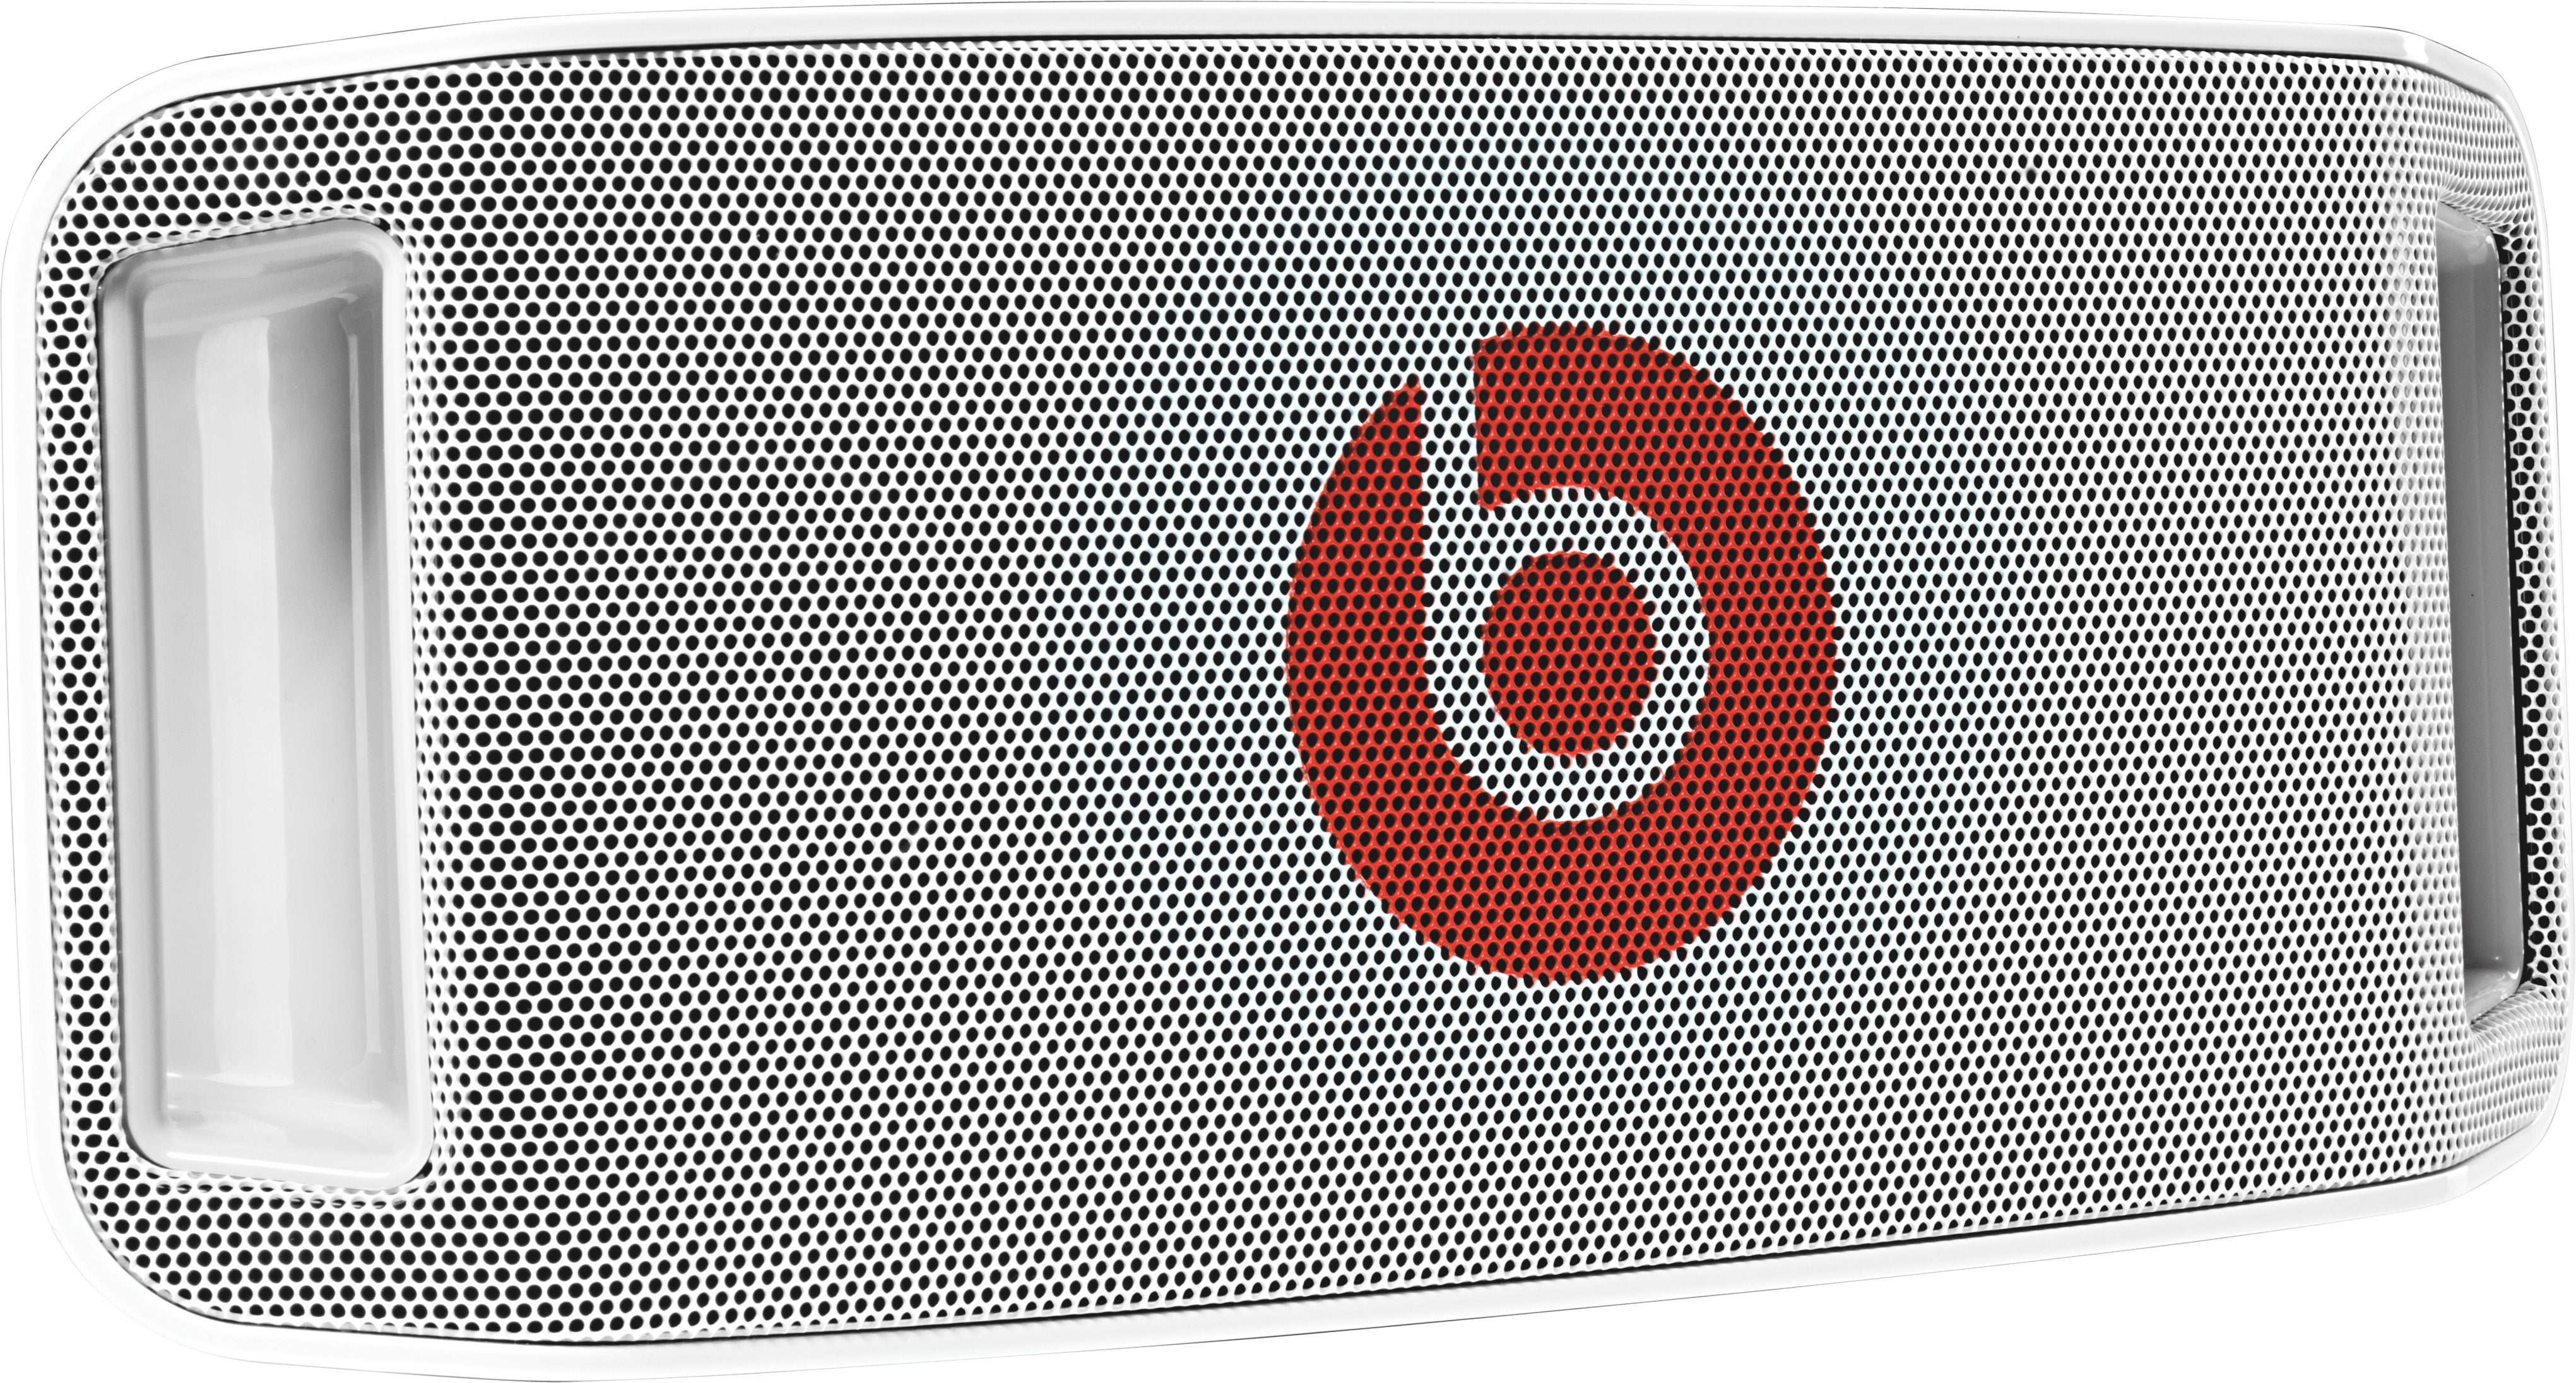 Beats by Dr. Dre Beatbox Portable audio system is coming to an AT&amp;T store near you for $399